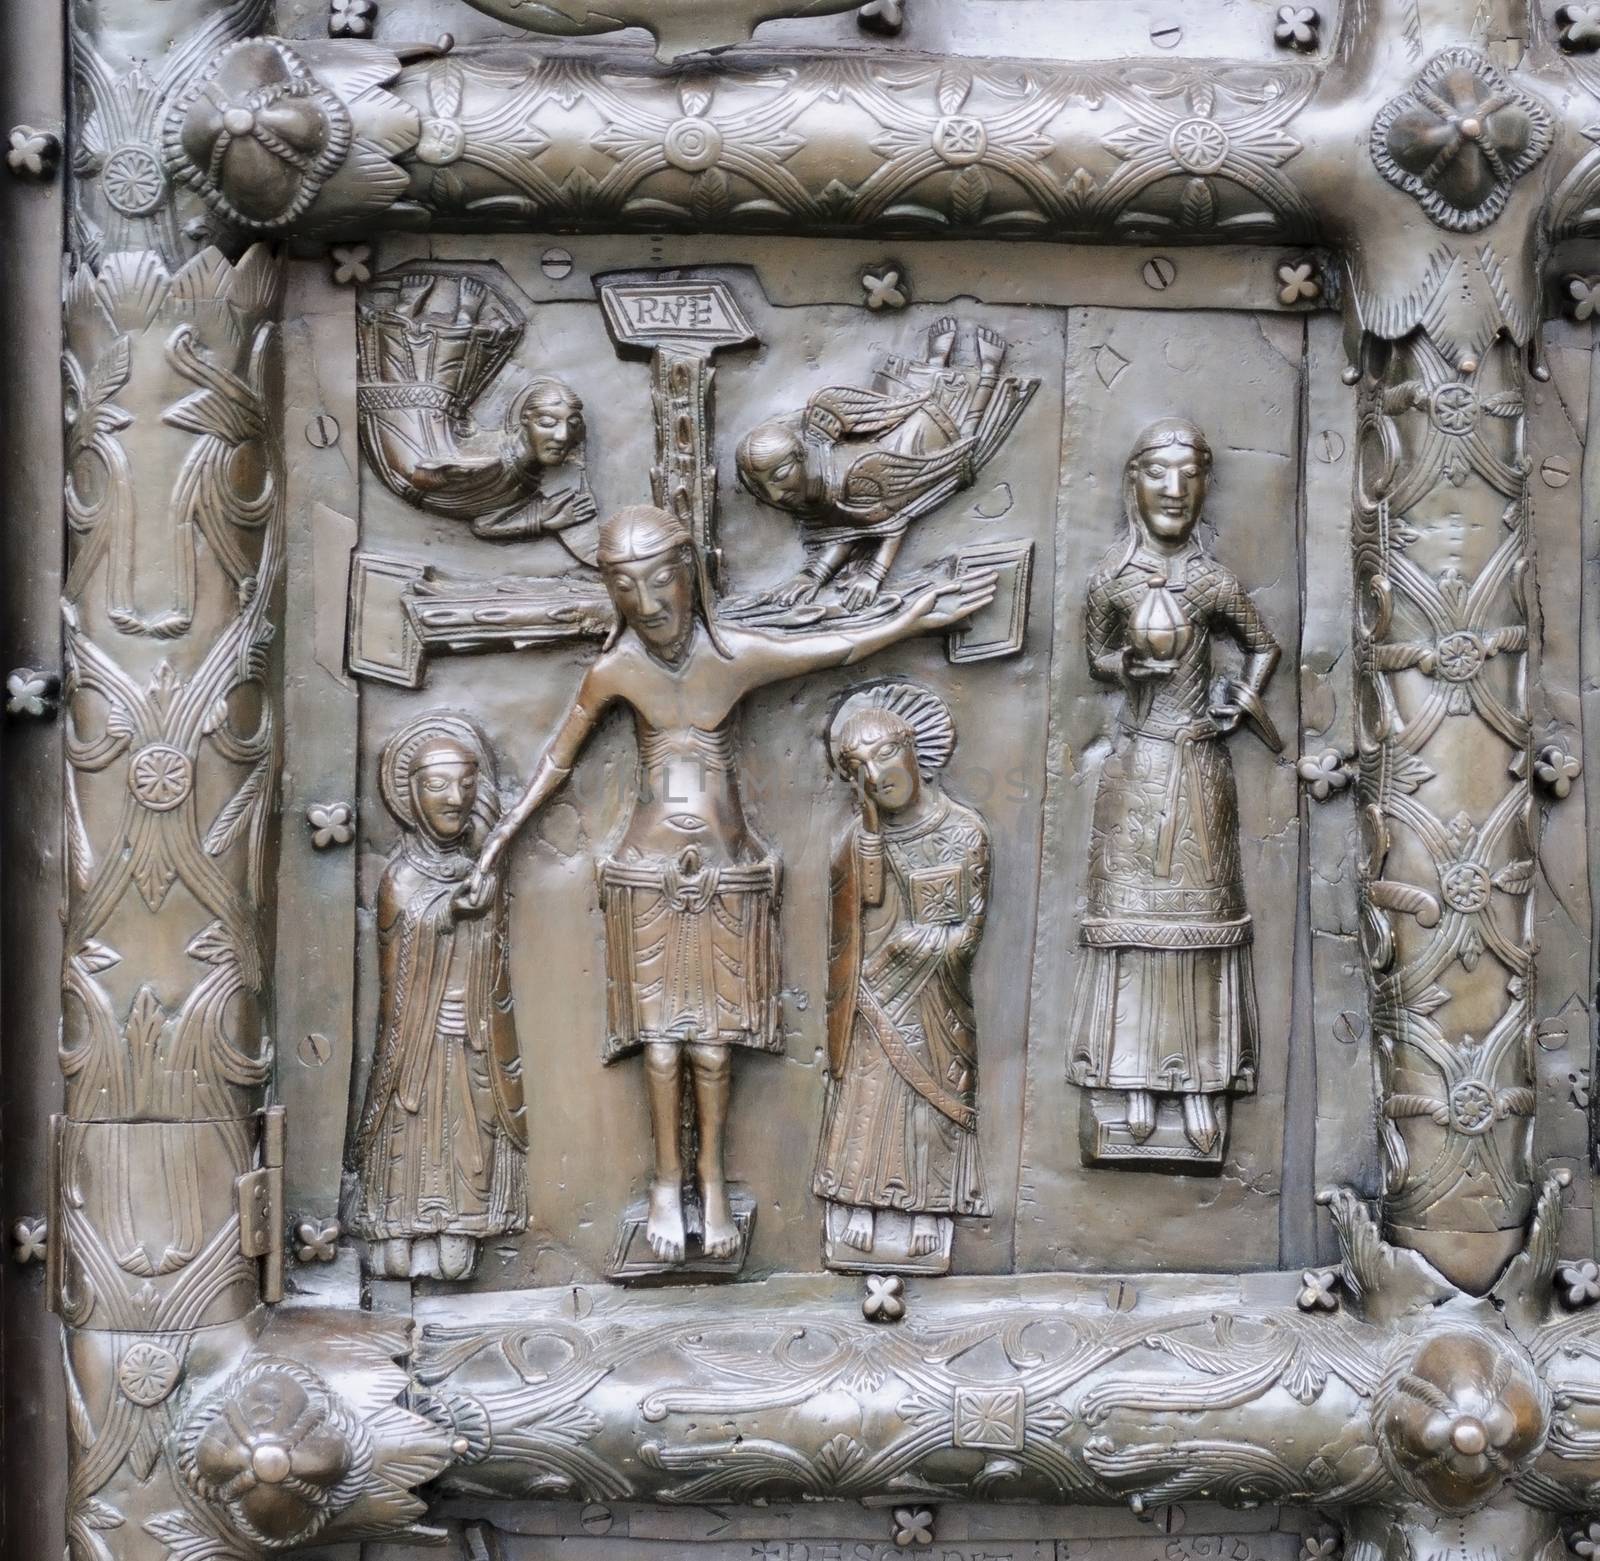 Bas-relief with Jesus Christ on ancient bronze gate in Veliky No by wander